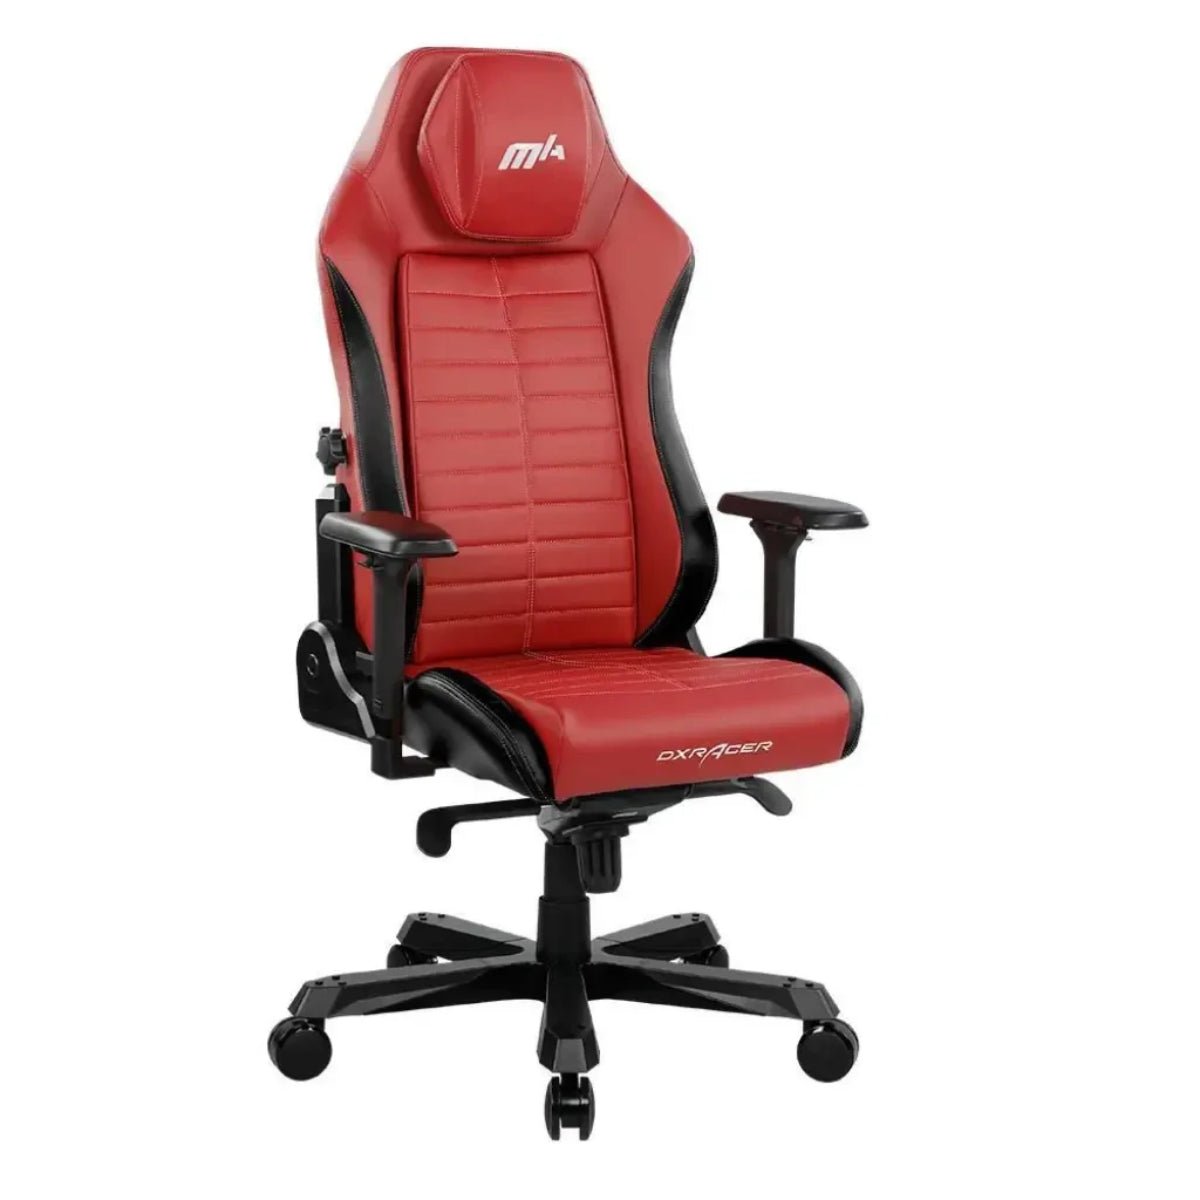 DXRacer Master Series Gaming Chair - Red & Black - Store 974 | ستور ٩٧٤